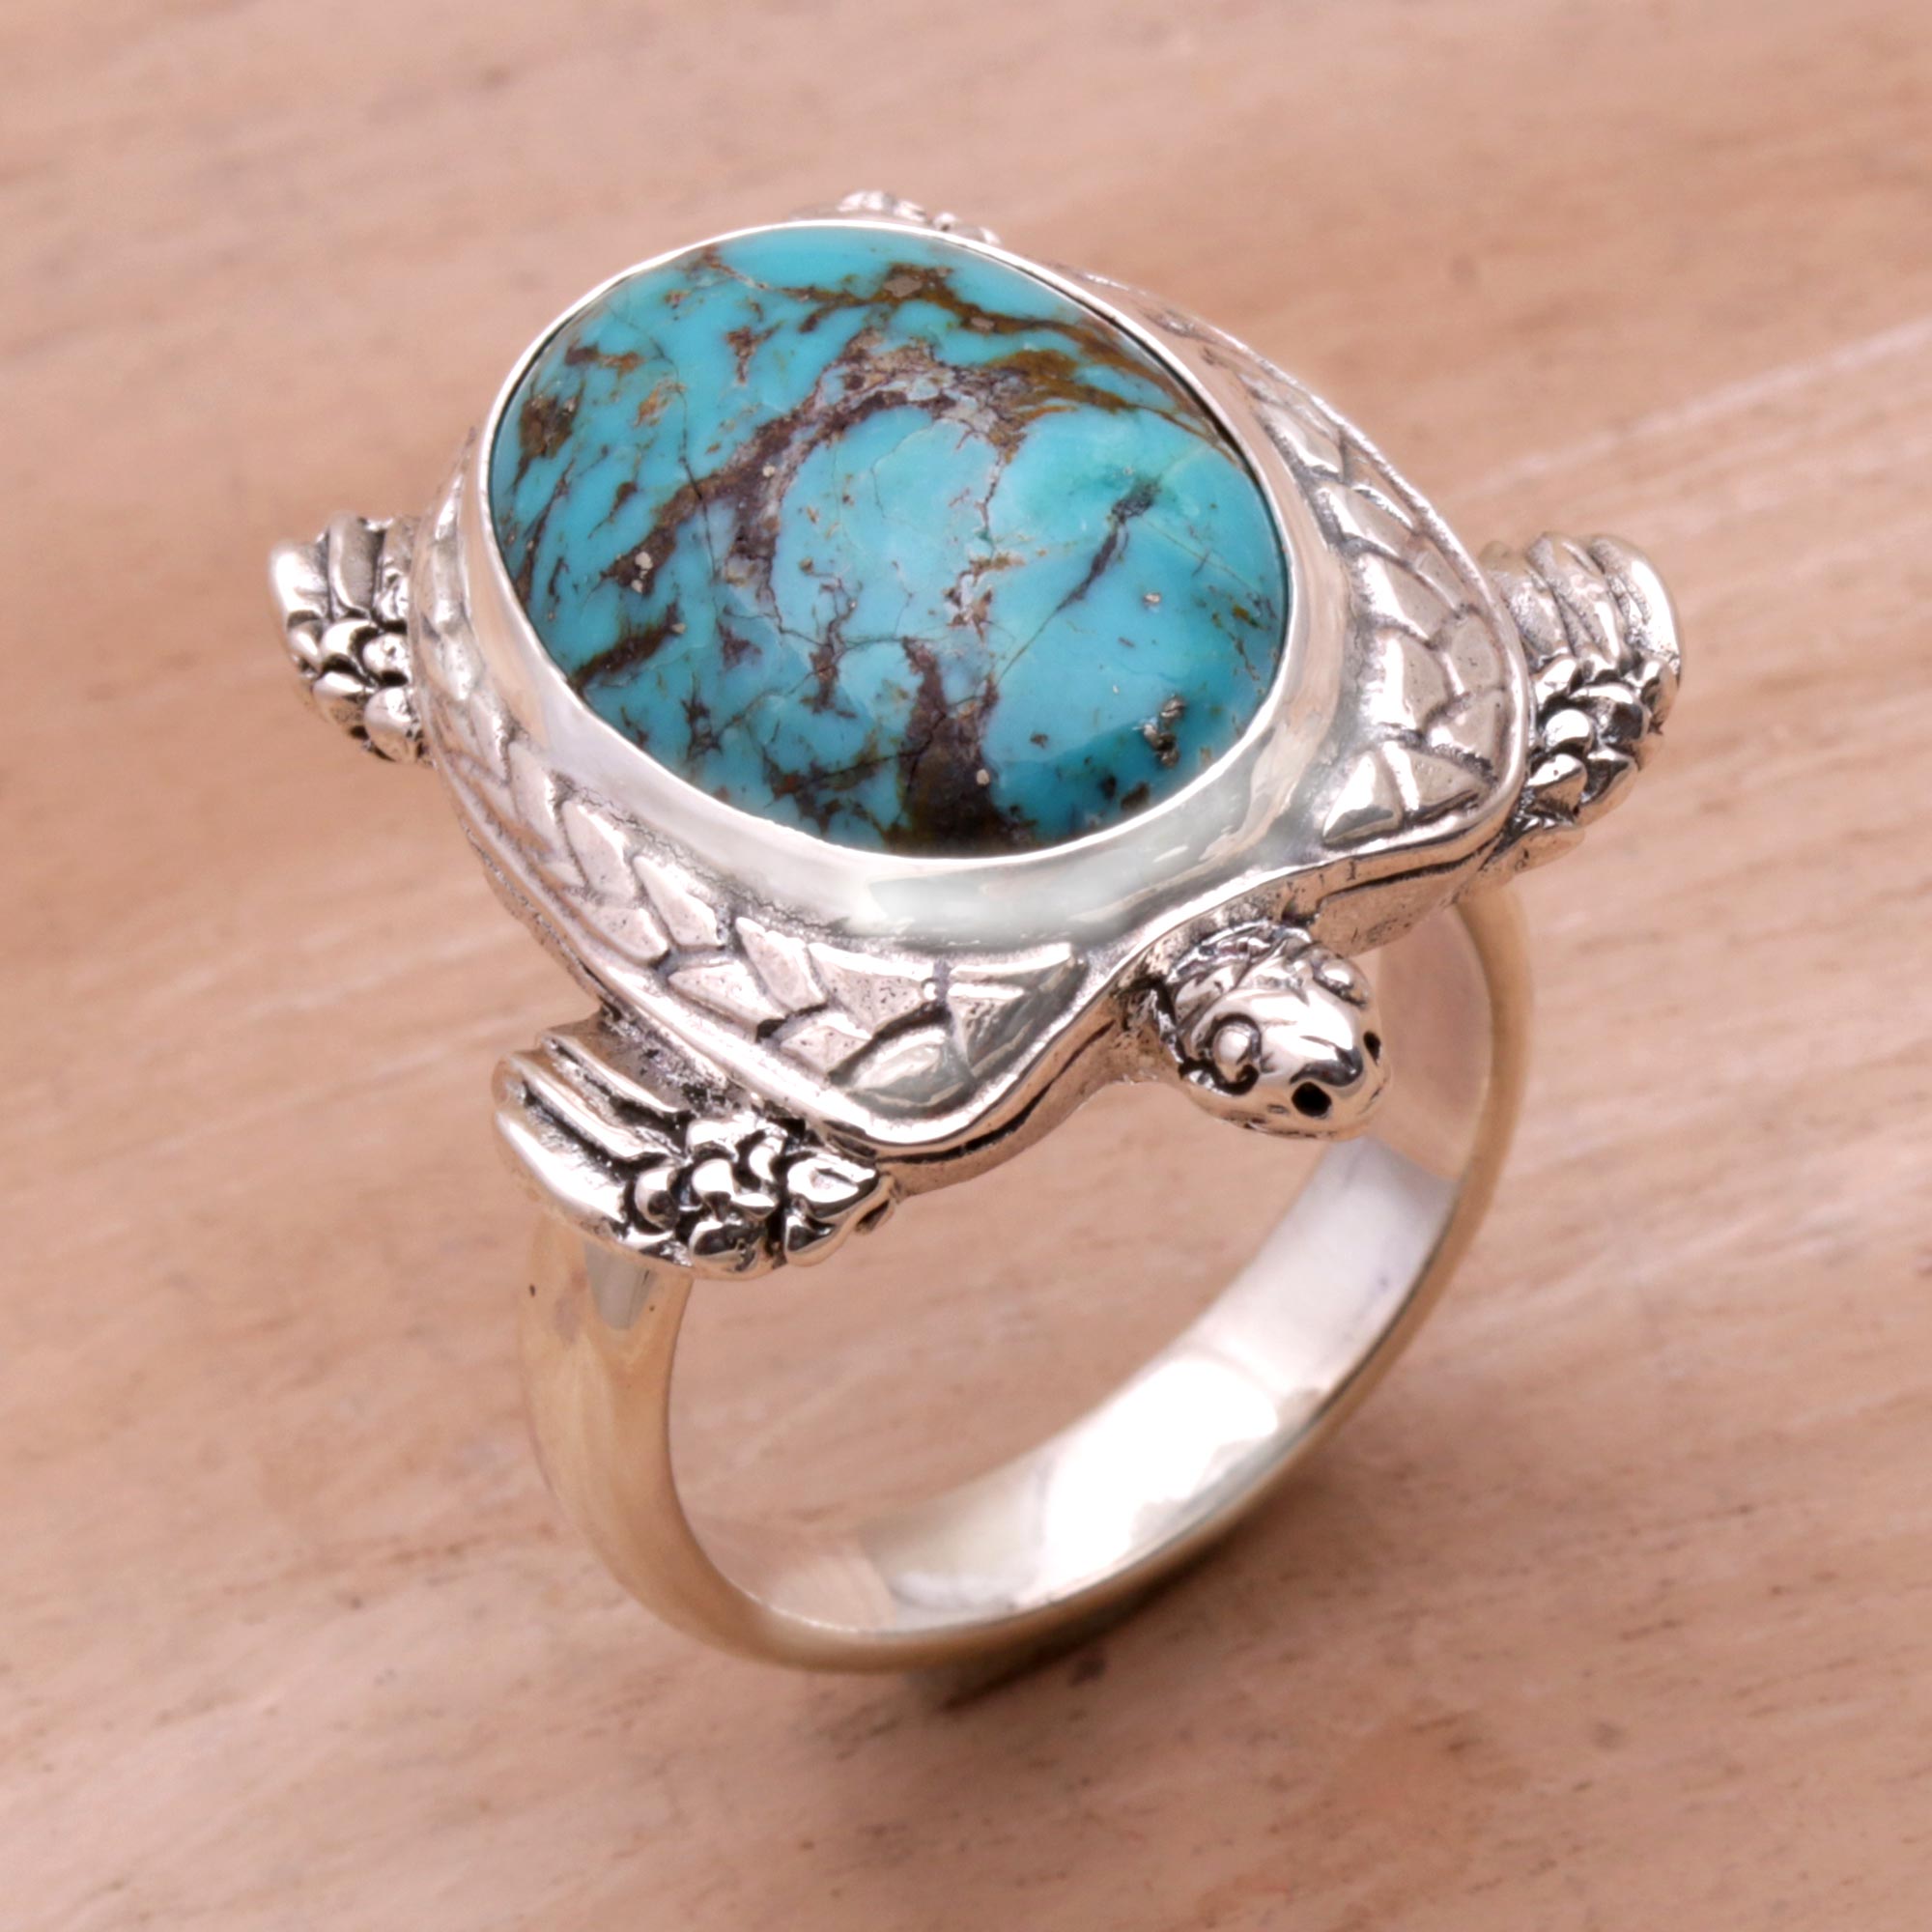 NOVICA Chelonia Turtle Men's Sterling Silver And Reconstituted Turquoise Ring - 10.5